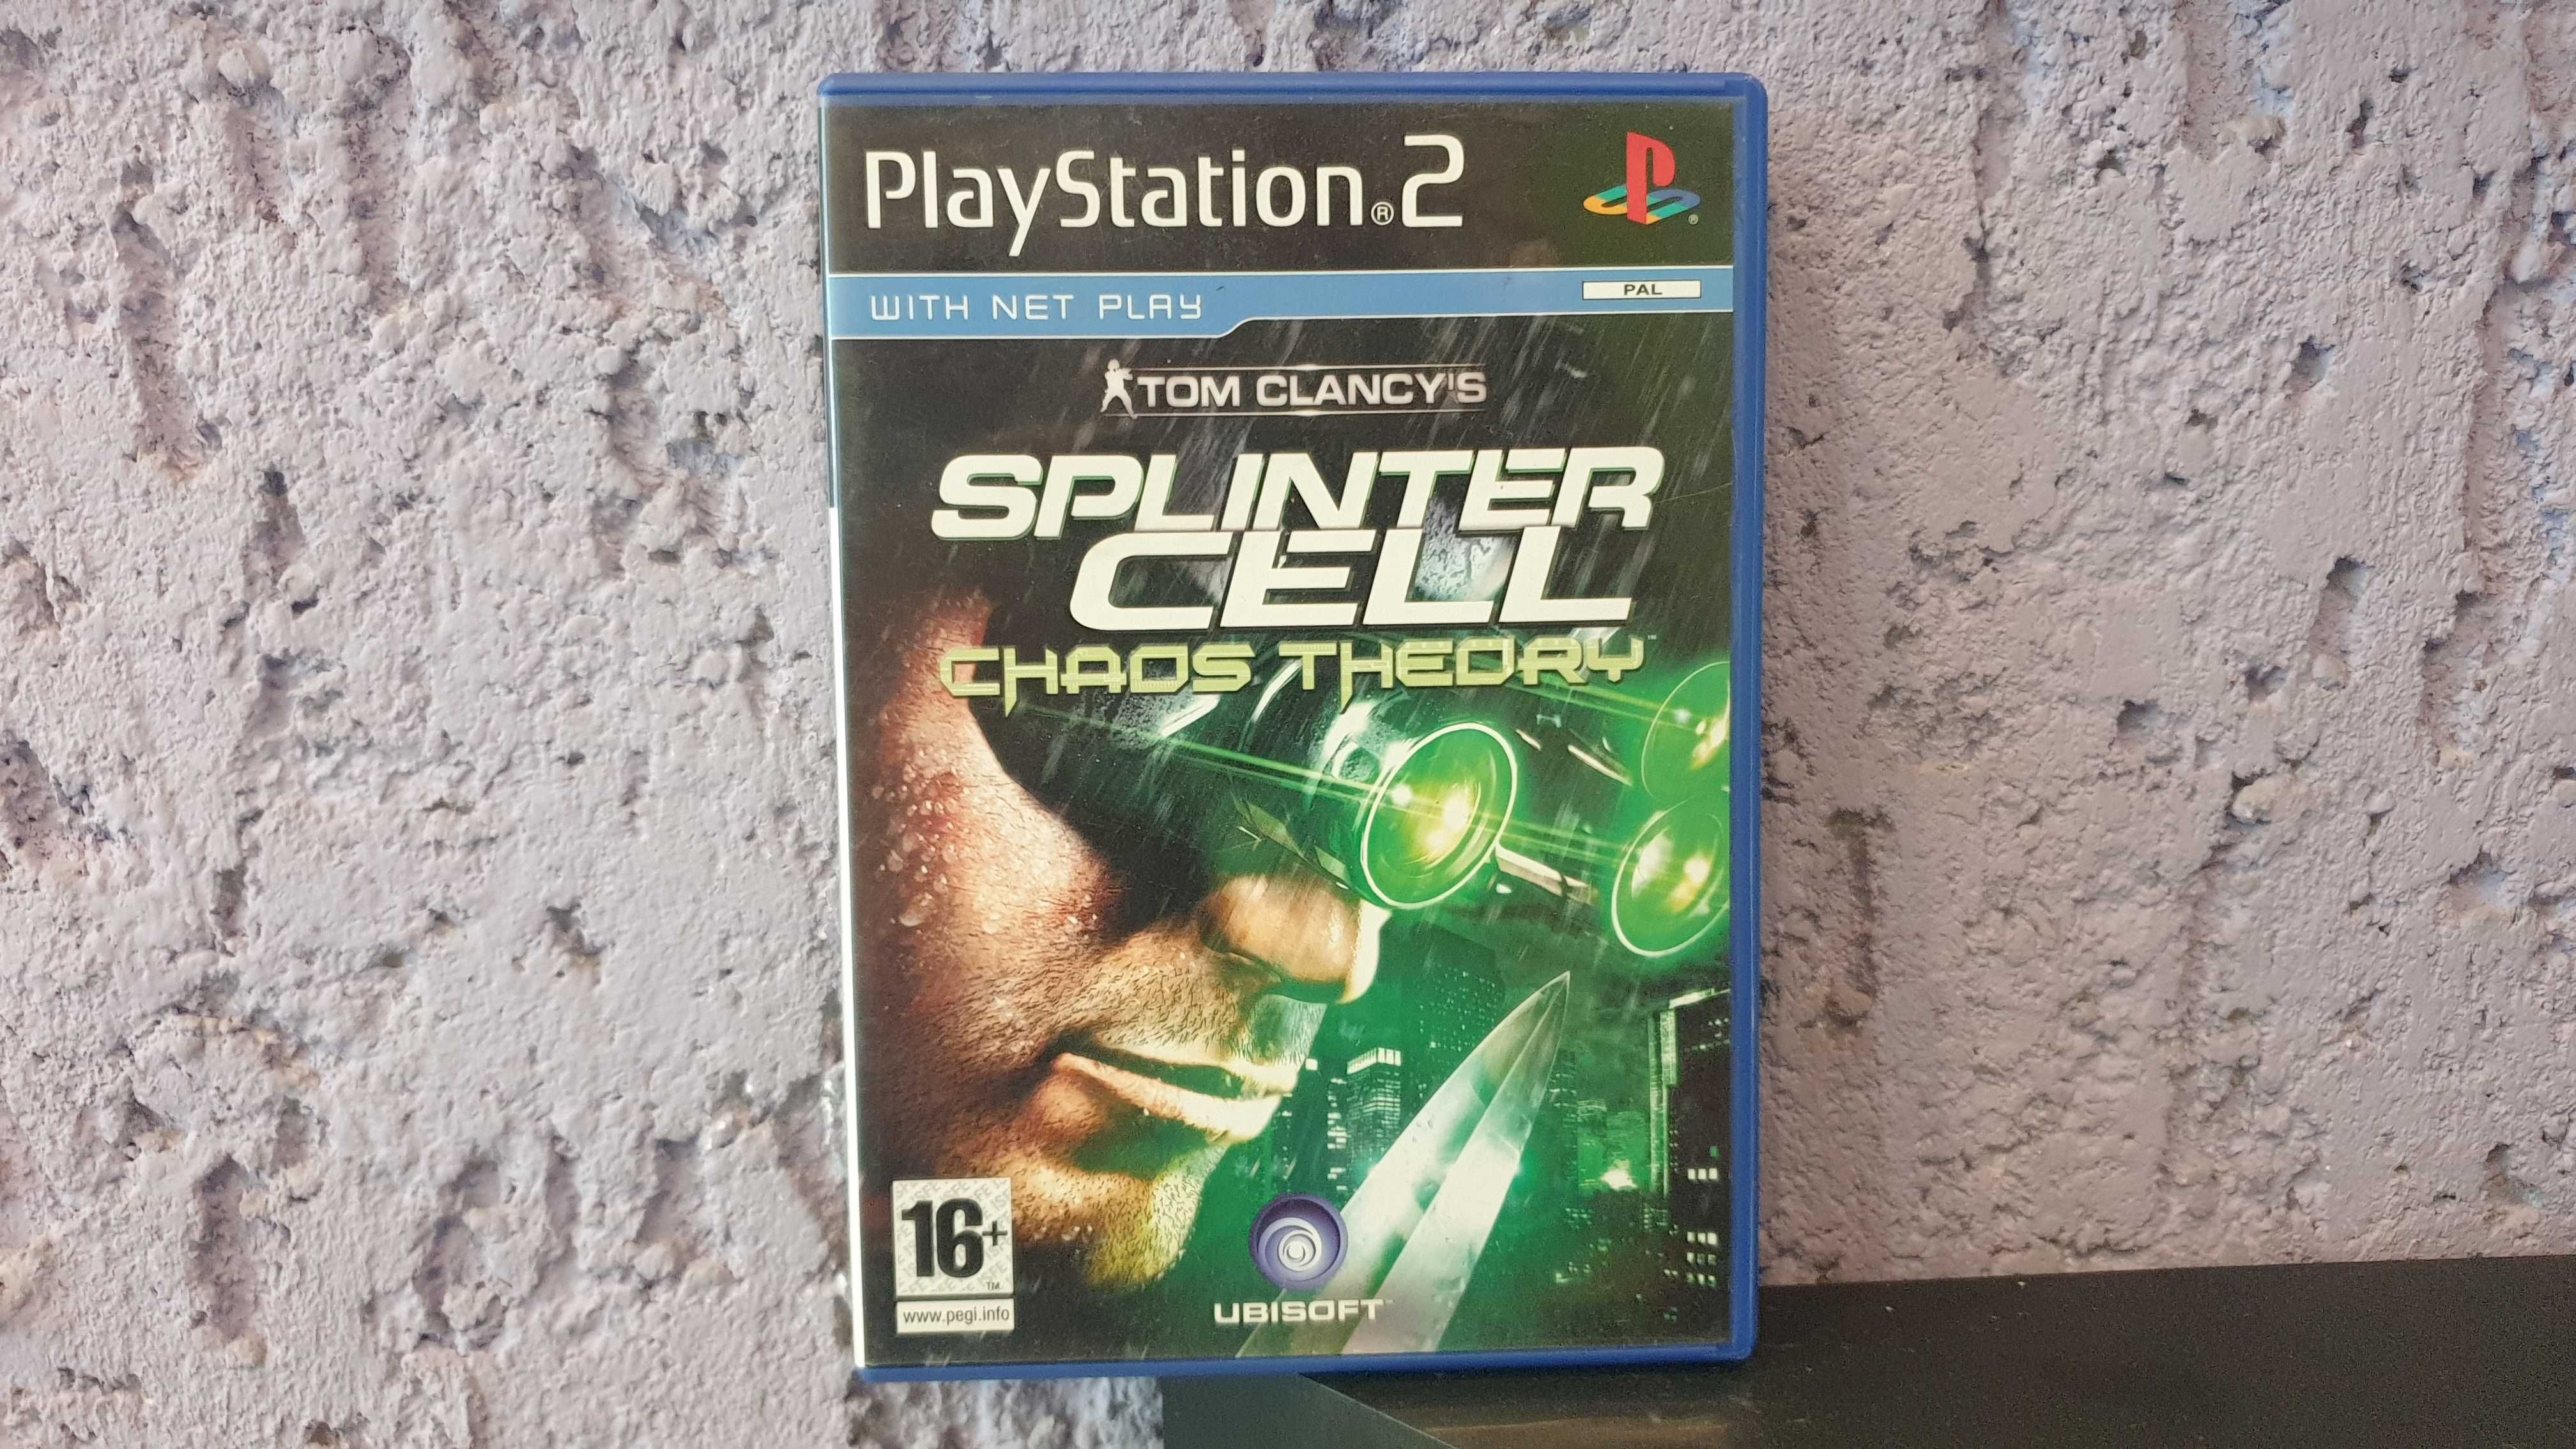 Splinter Cell Chaos Theory / PS2 / PlayStation 2 / Tom Clancy's